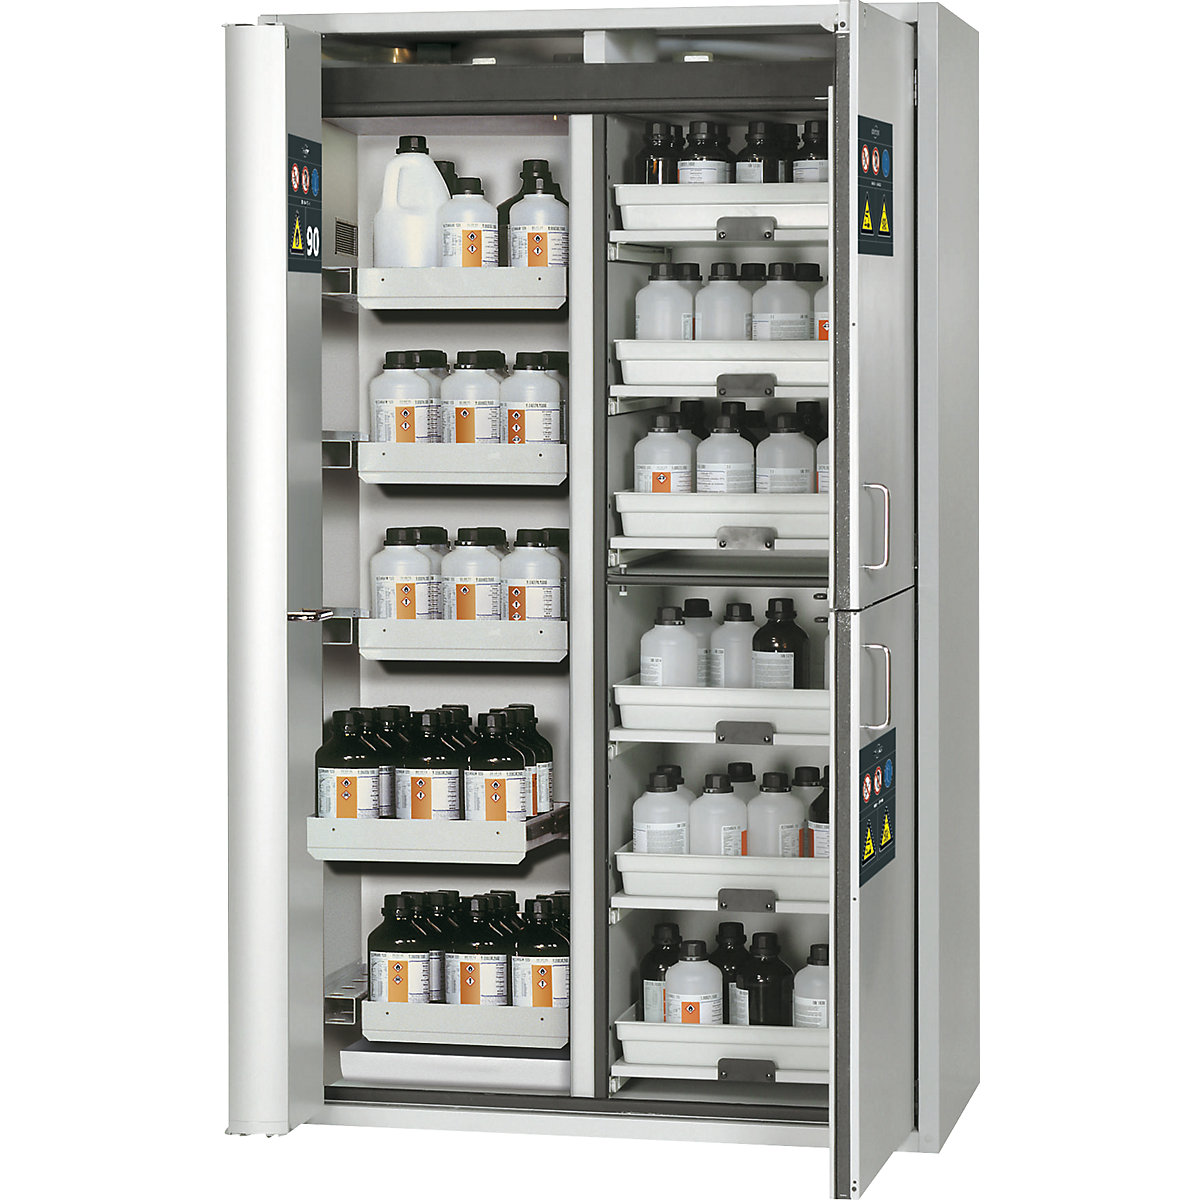 Type 90 safety combination cupboard – asecos